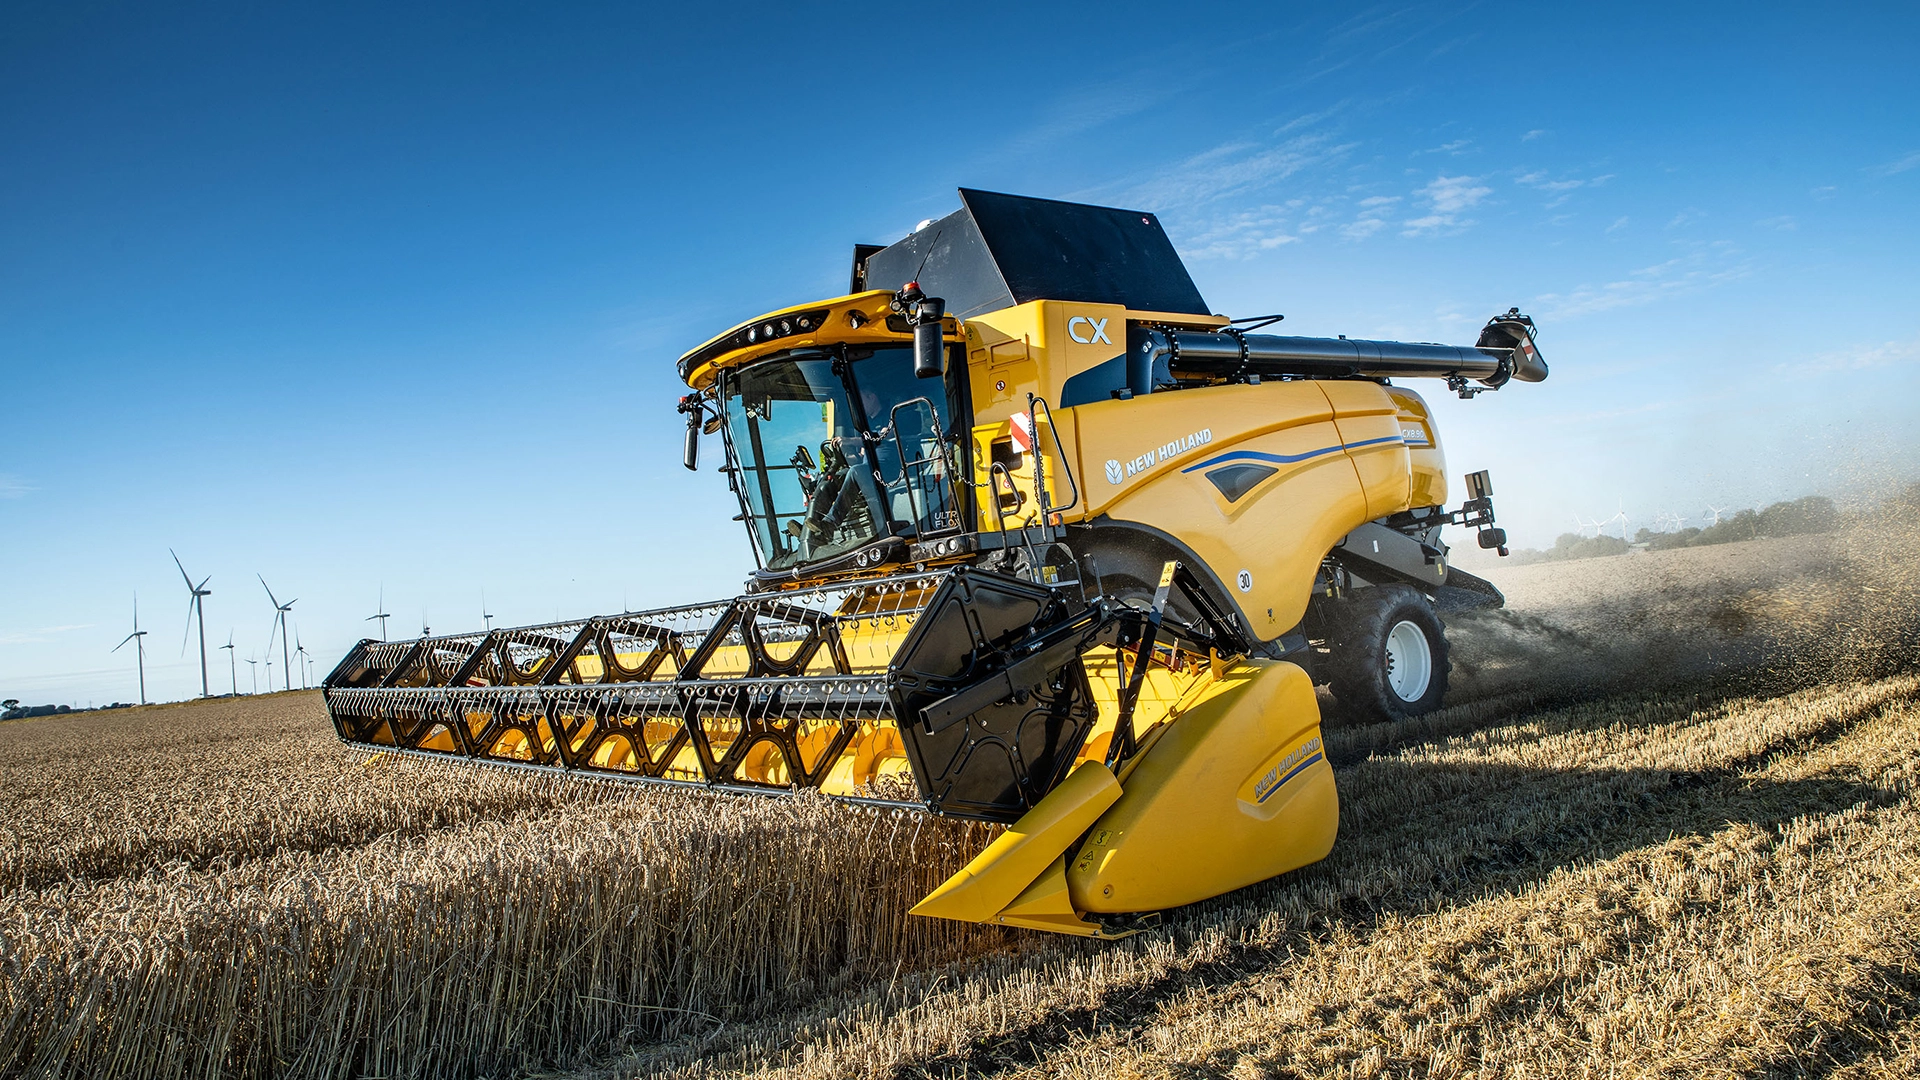 New Holland CX7 & CX8 harvesting golden crops, clear sky with distant wind turbines.